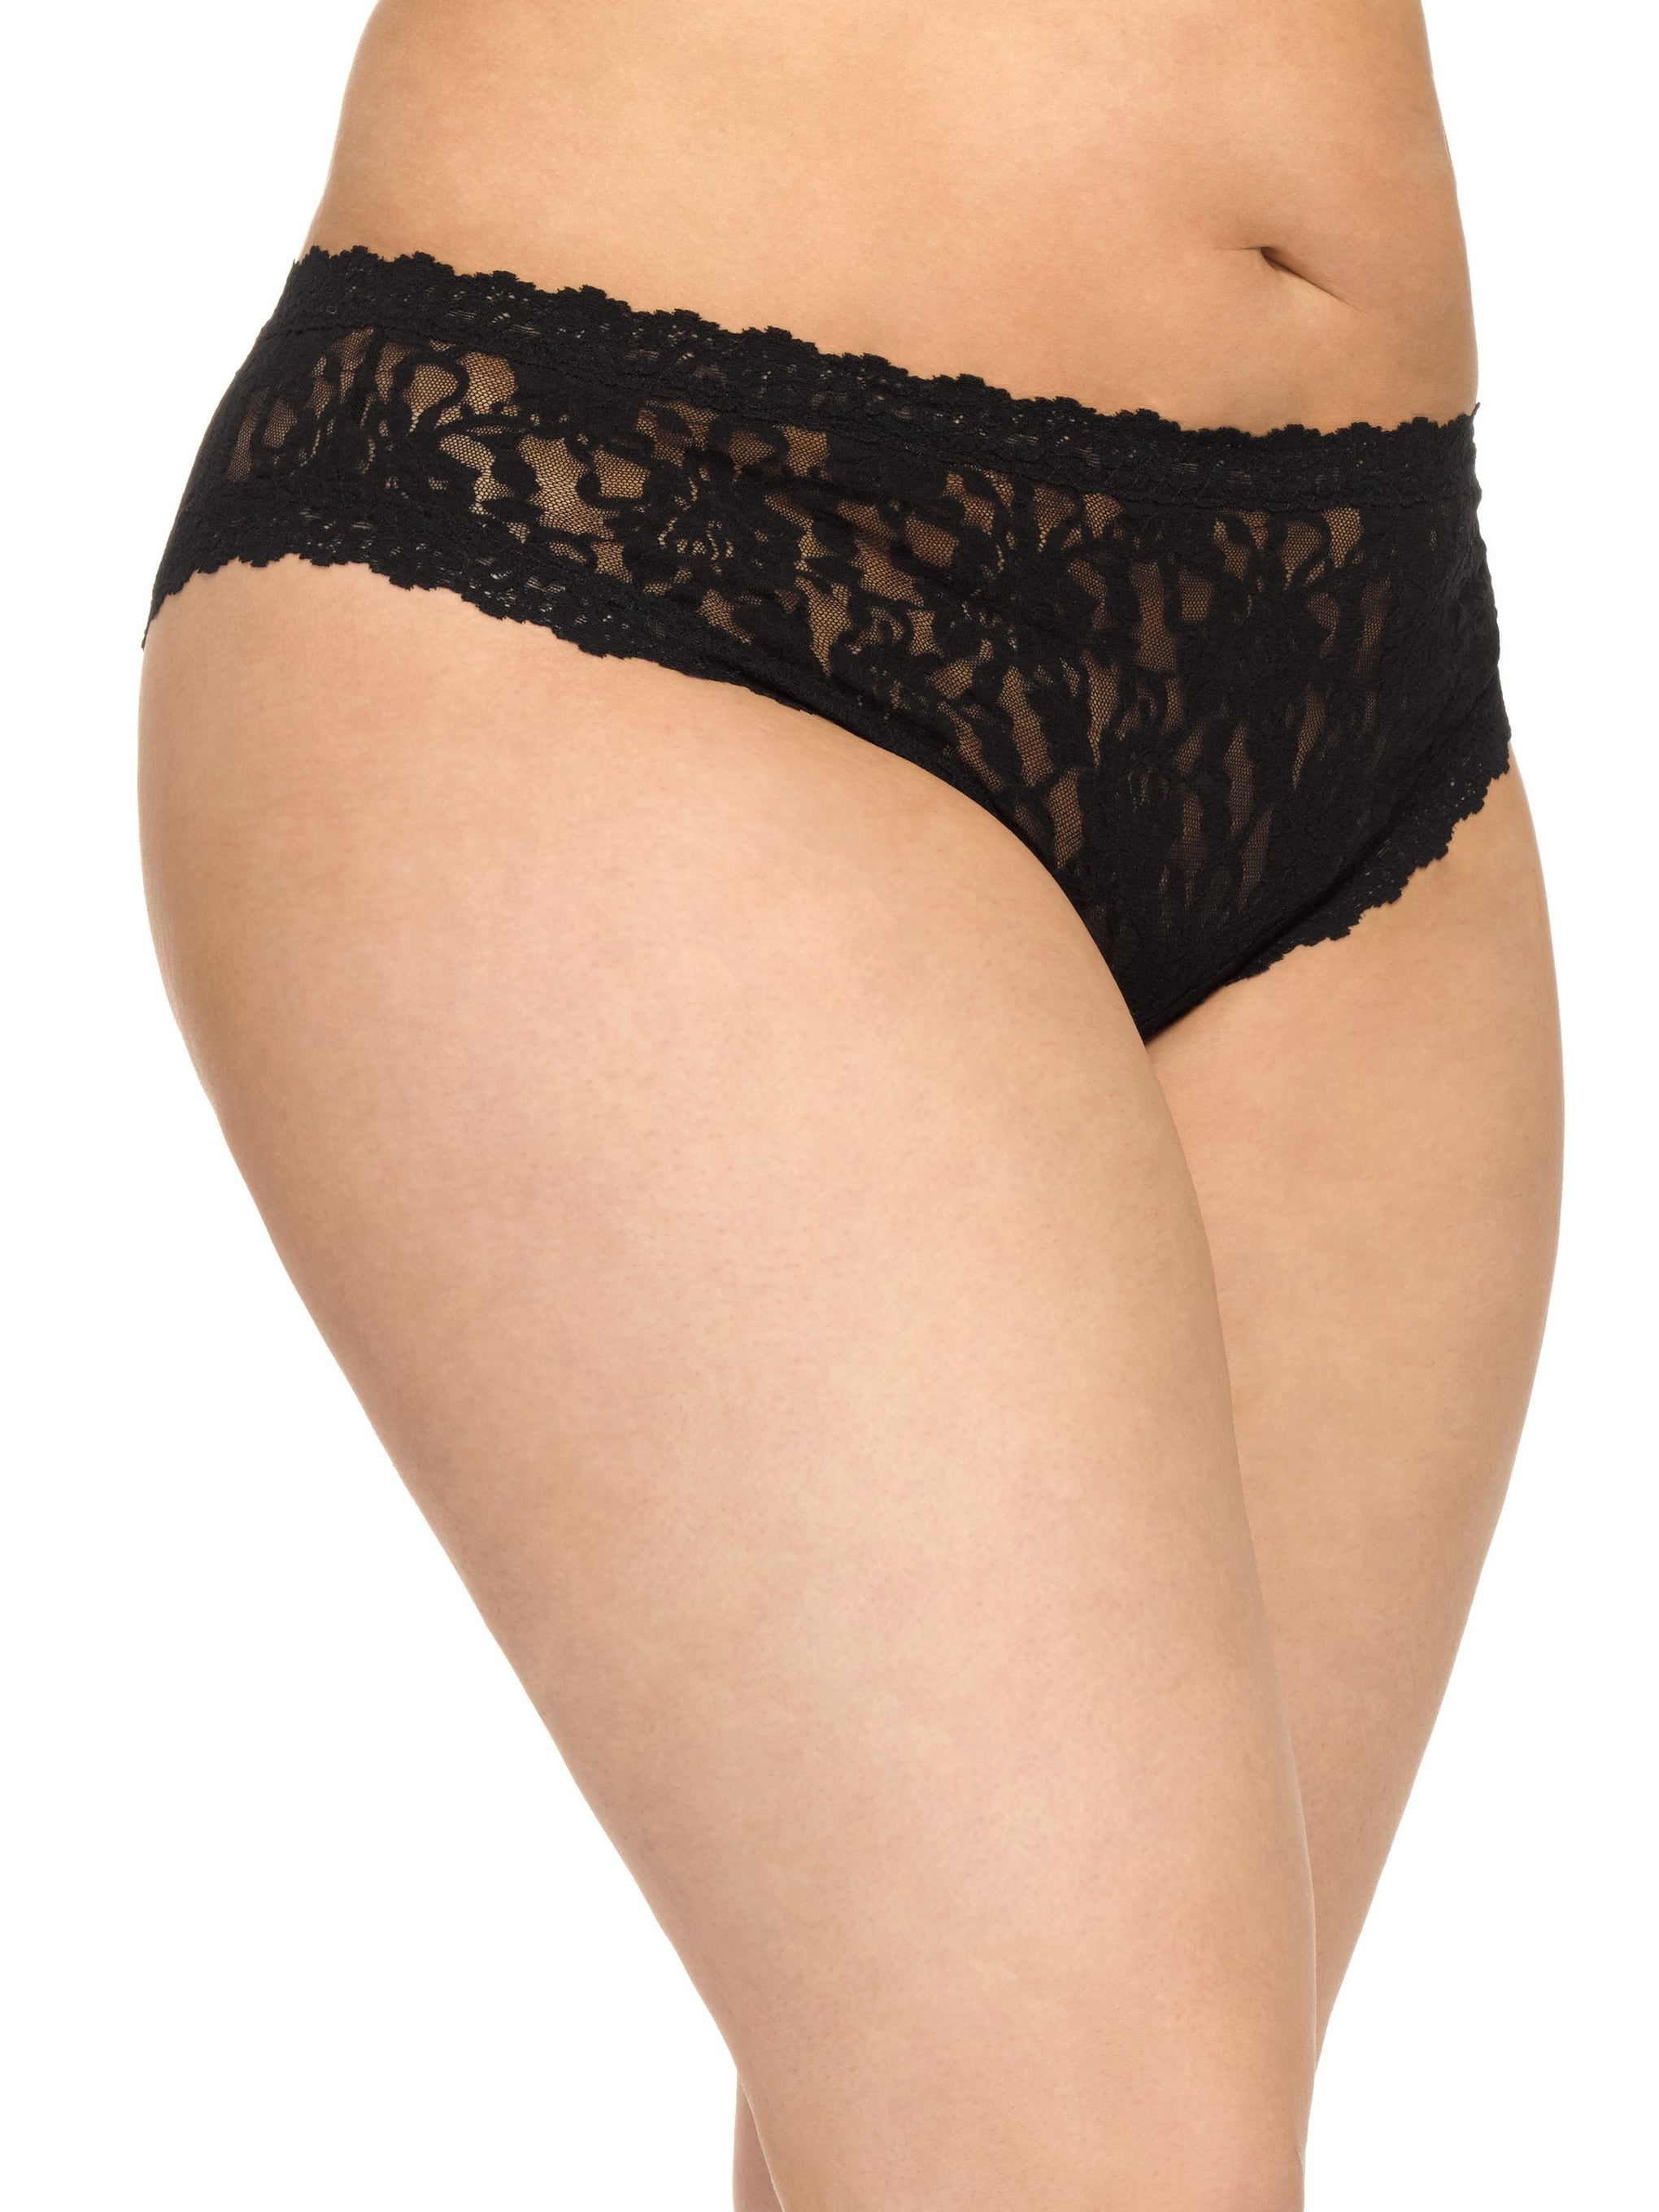 Plus Size Signature Lace Crotchless Cheeky Hipster